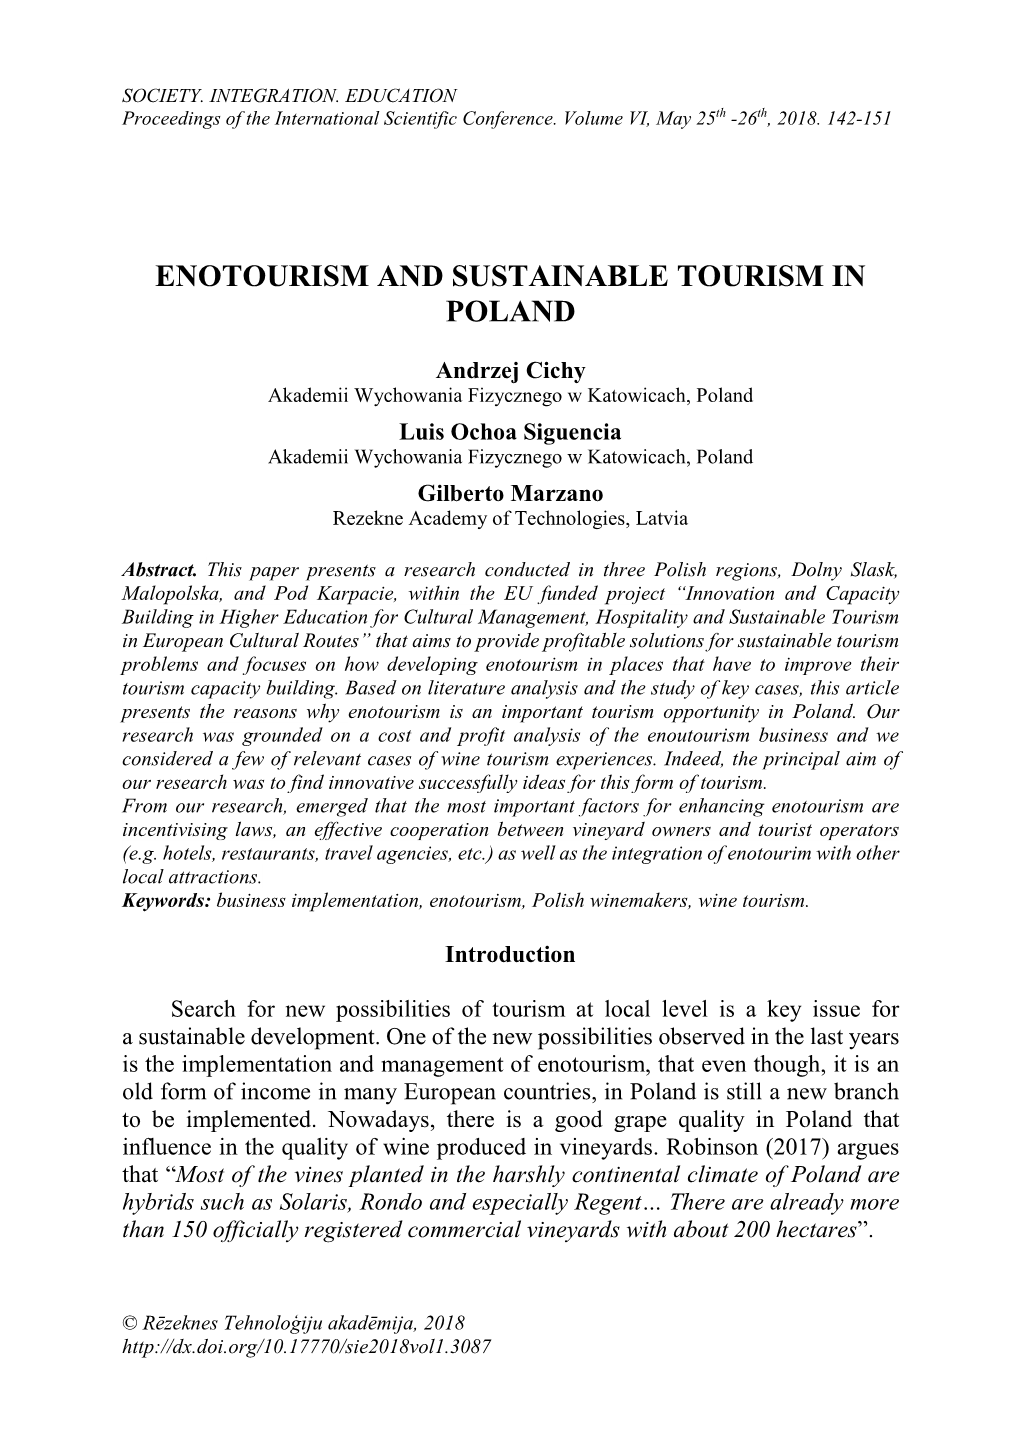 Enotourism and Sustainable Tourism in Poland